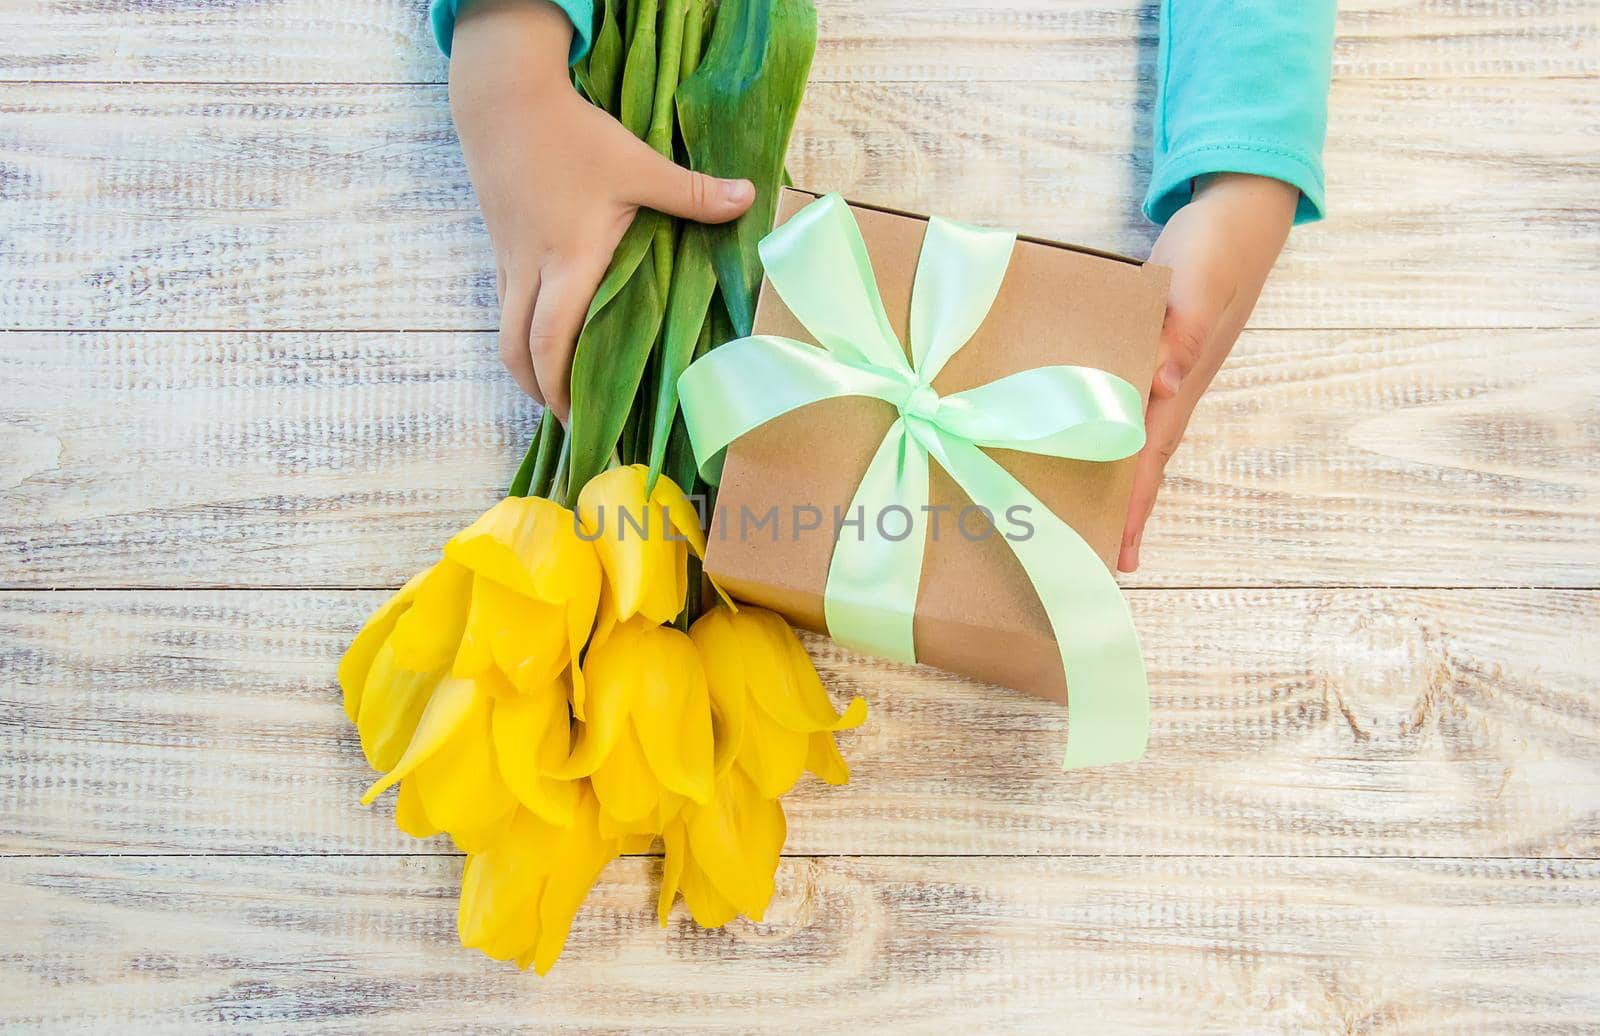 gift and flowers. selective focus. holidays and events.